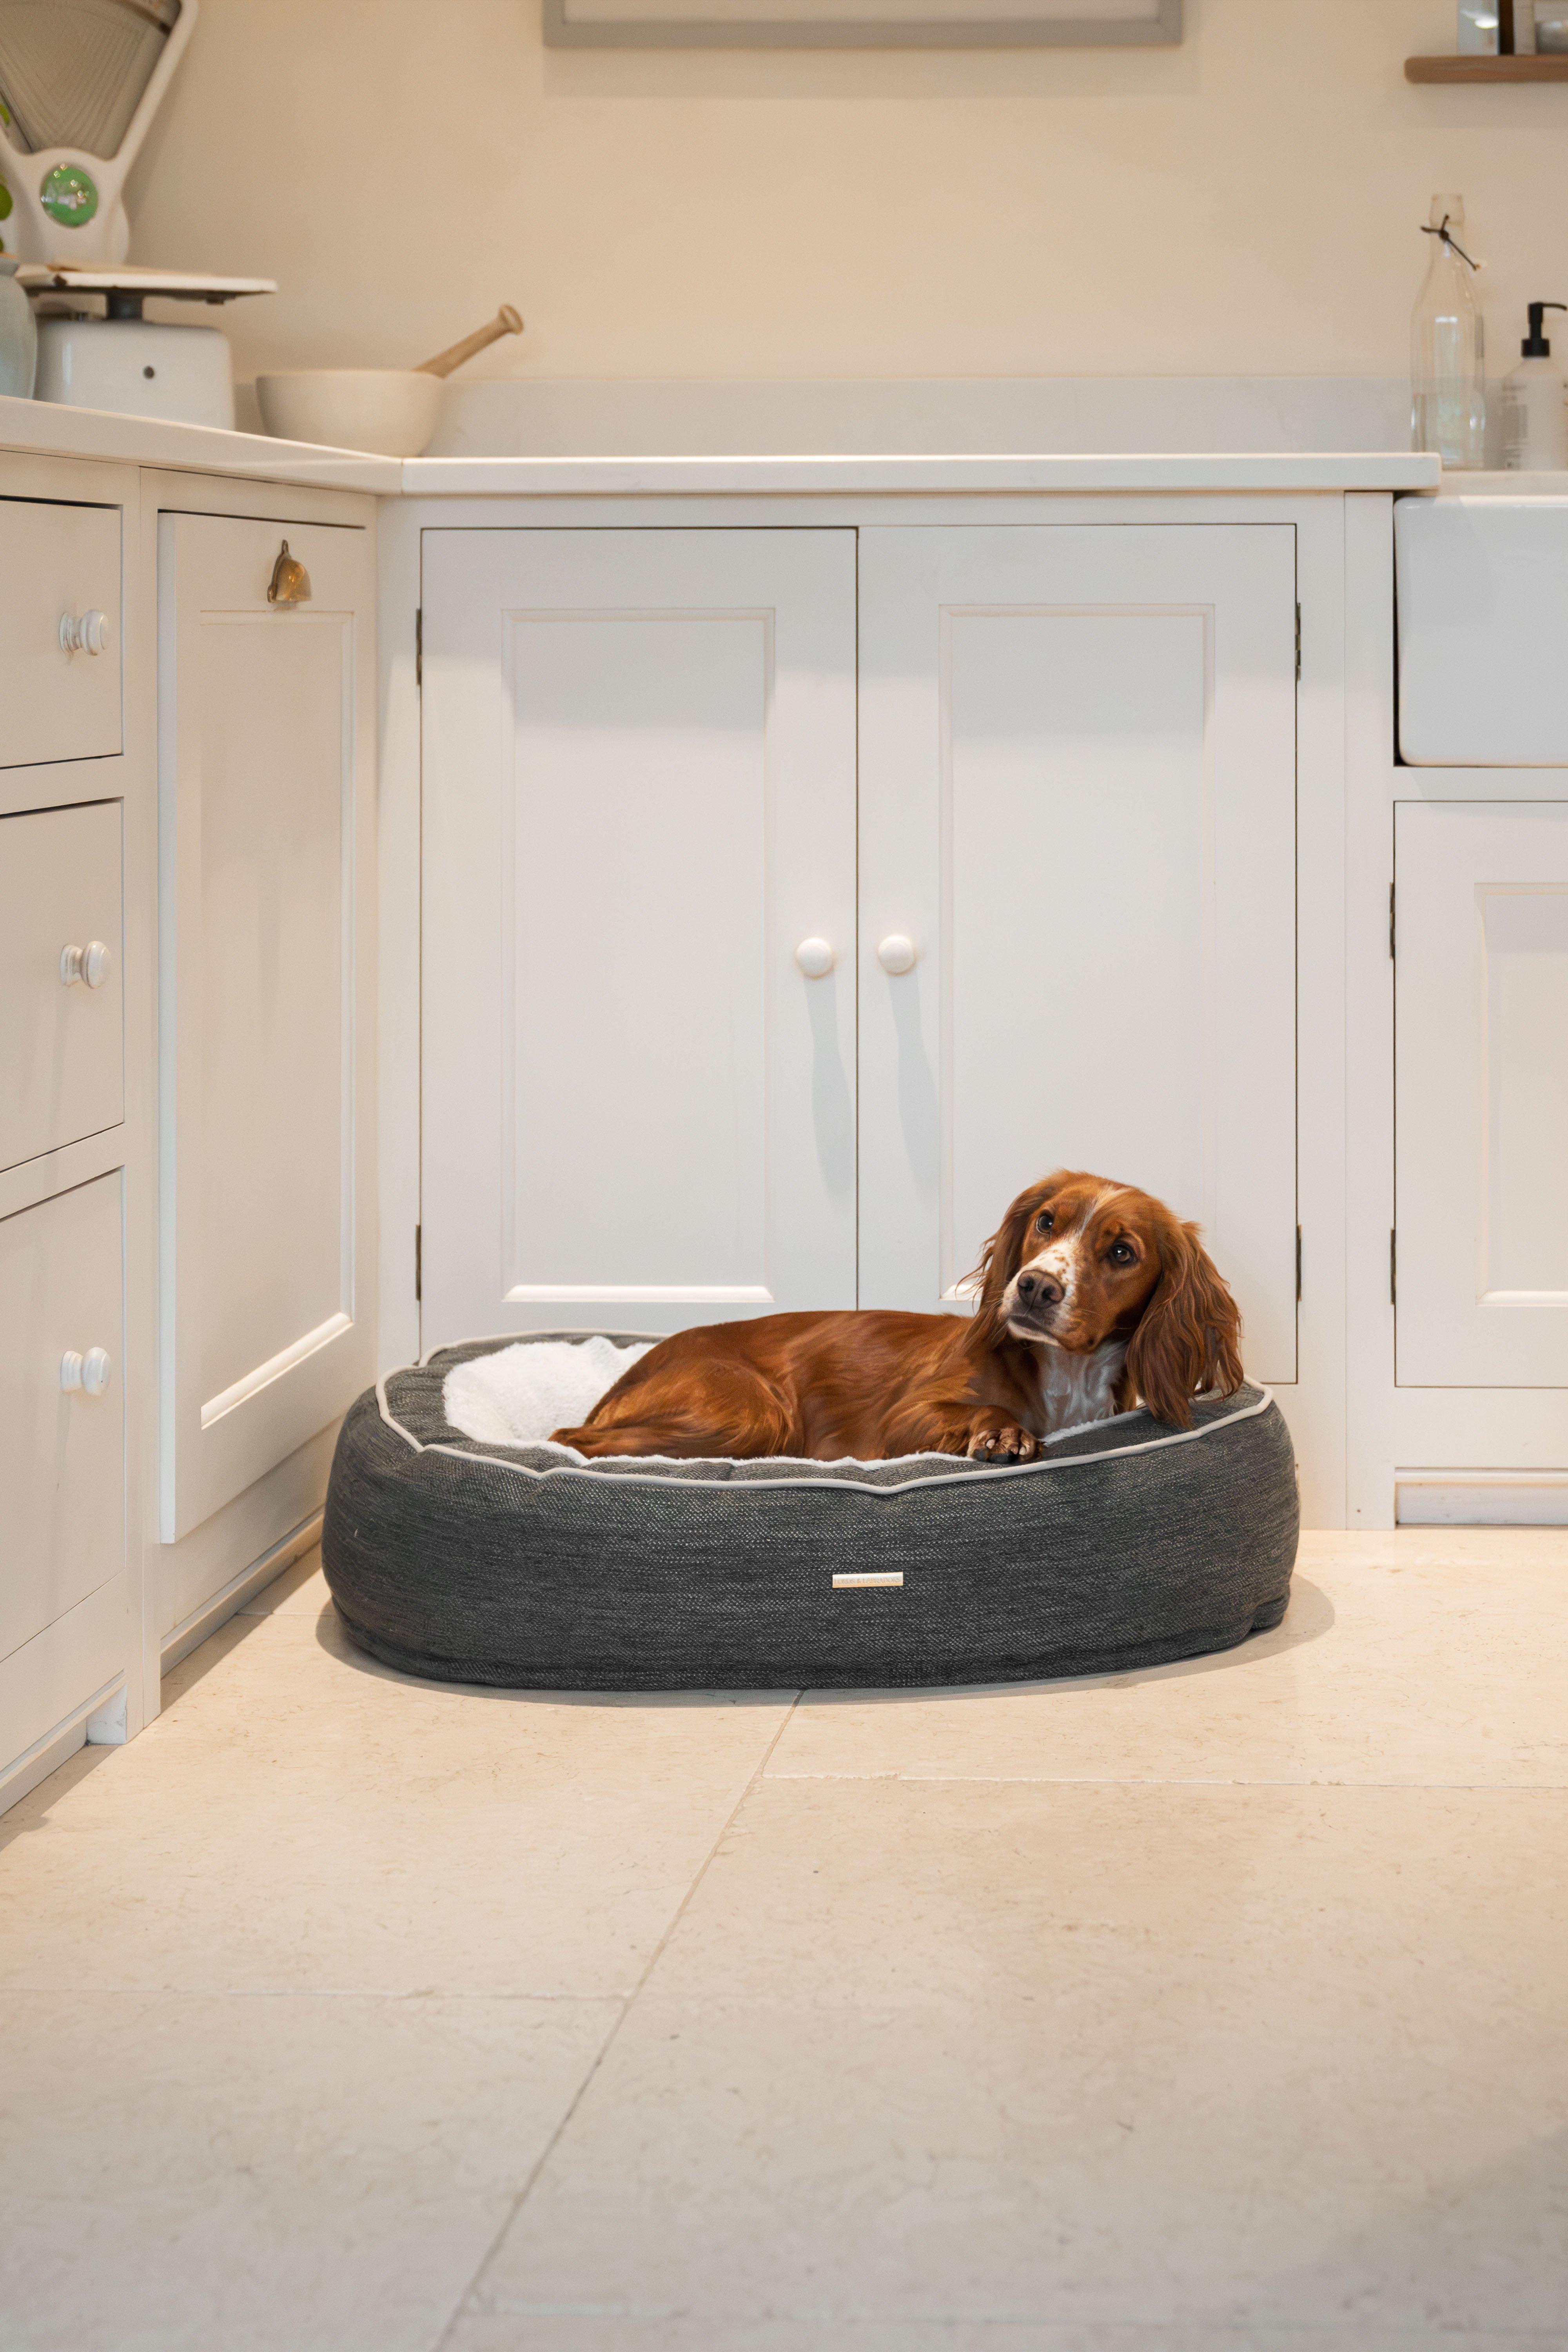 The Nest Dog Bed